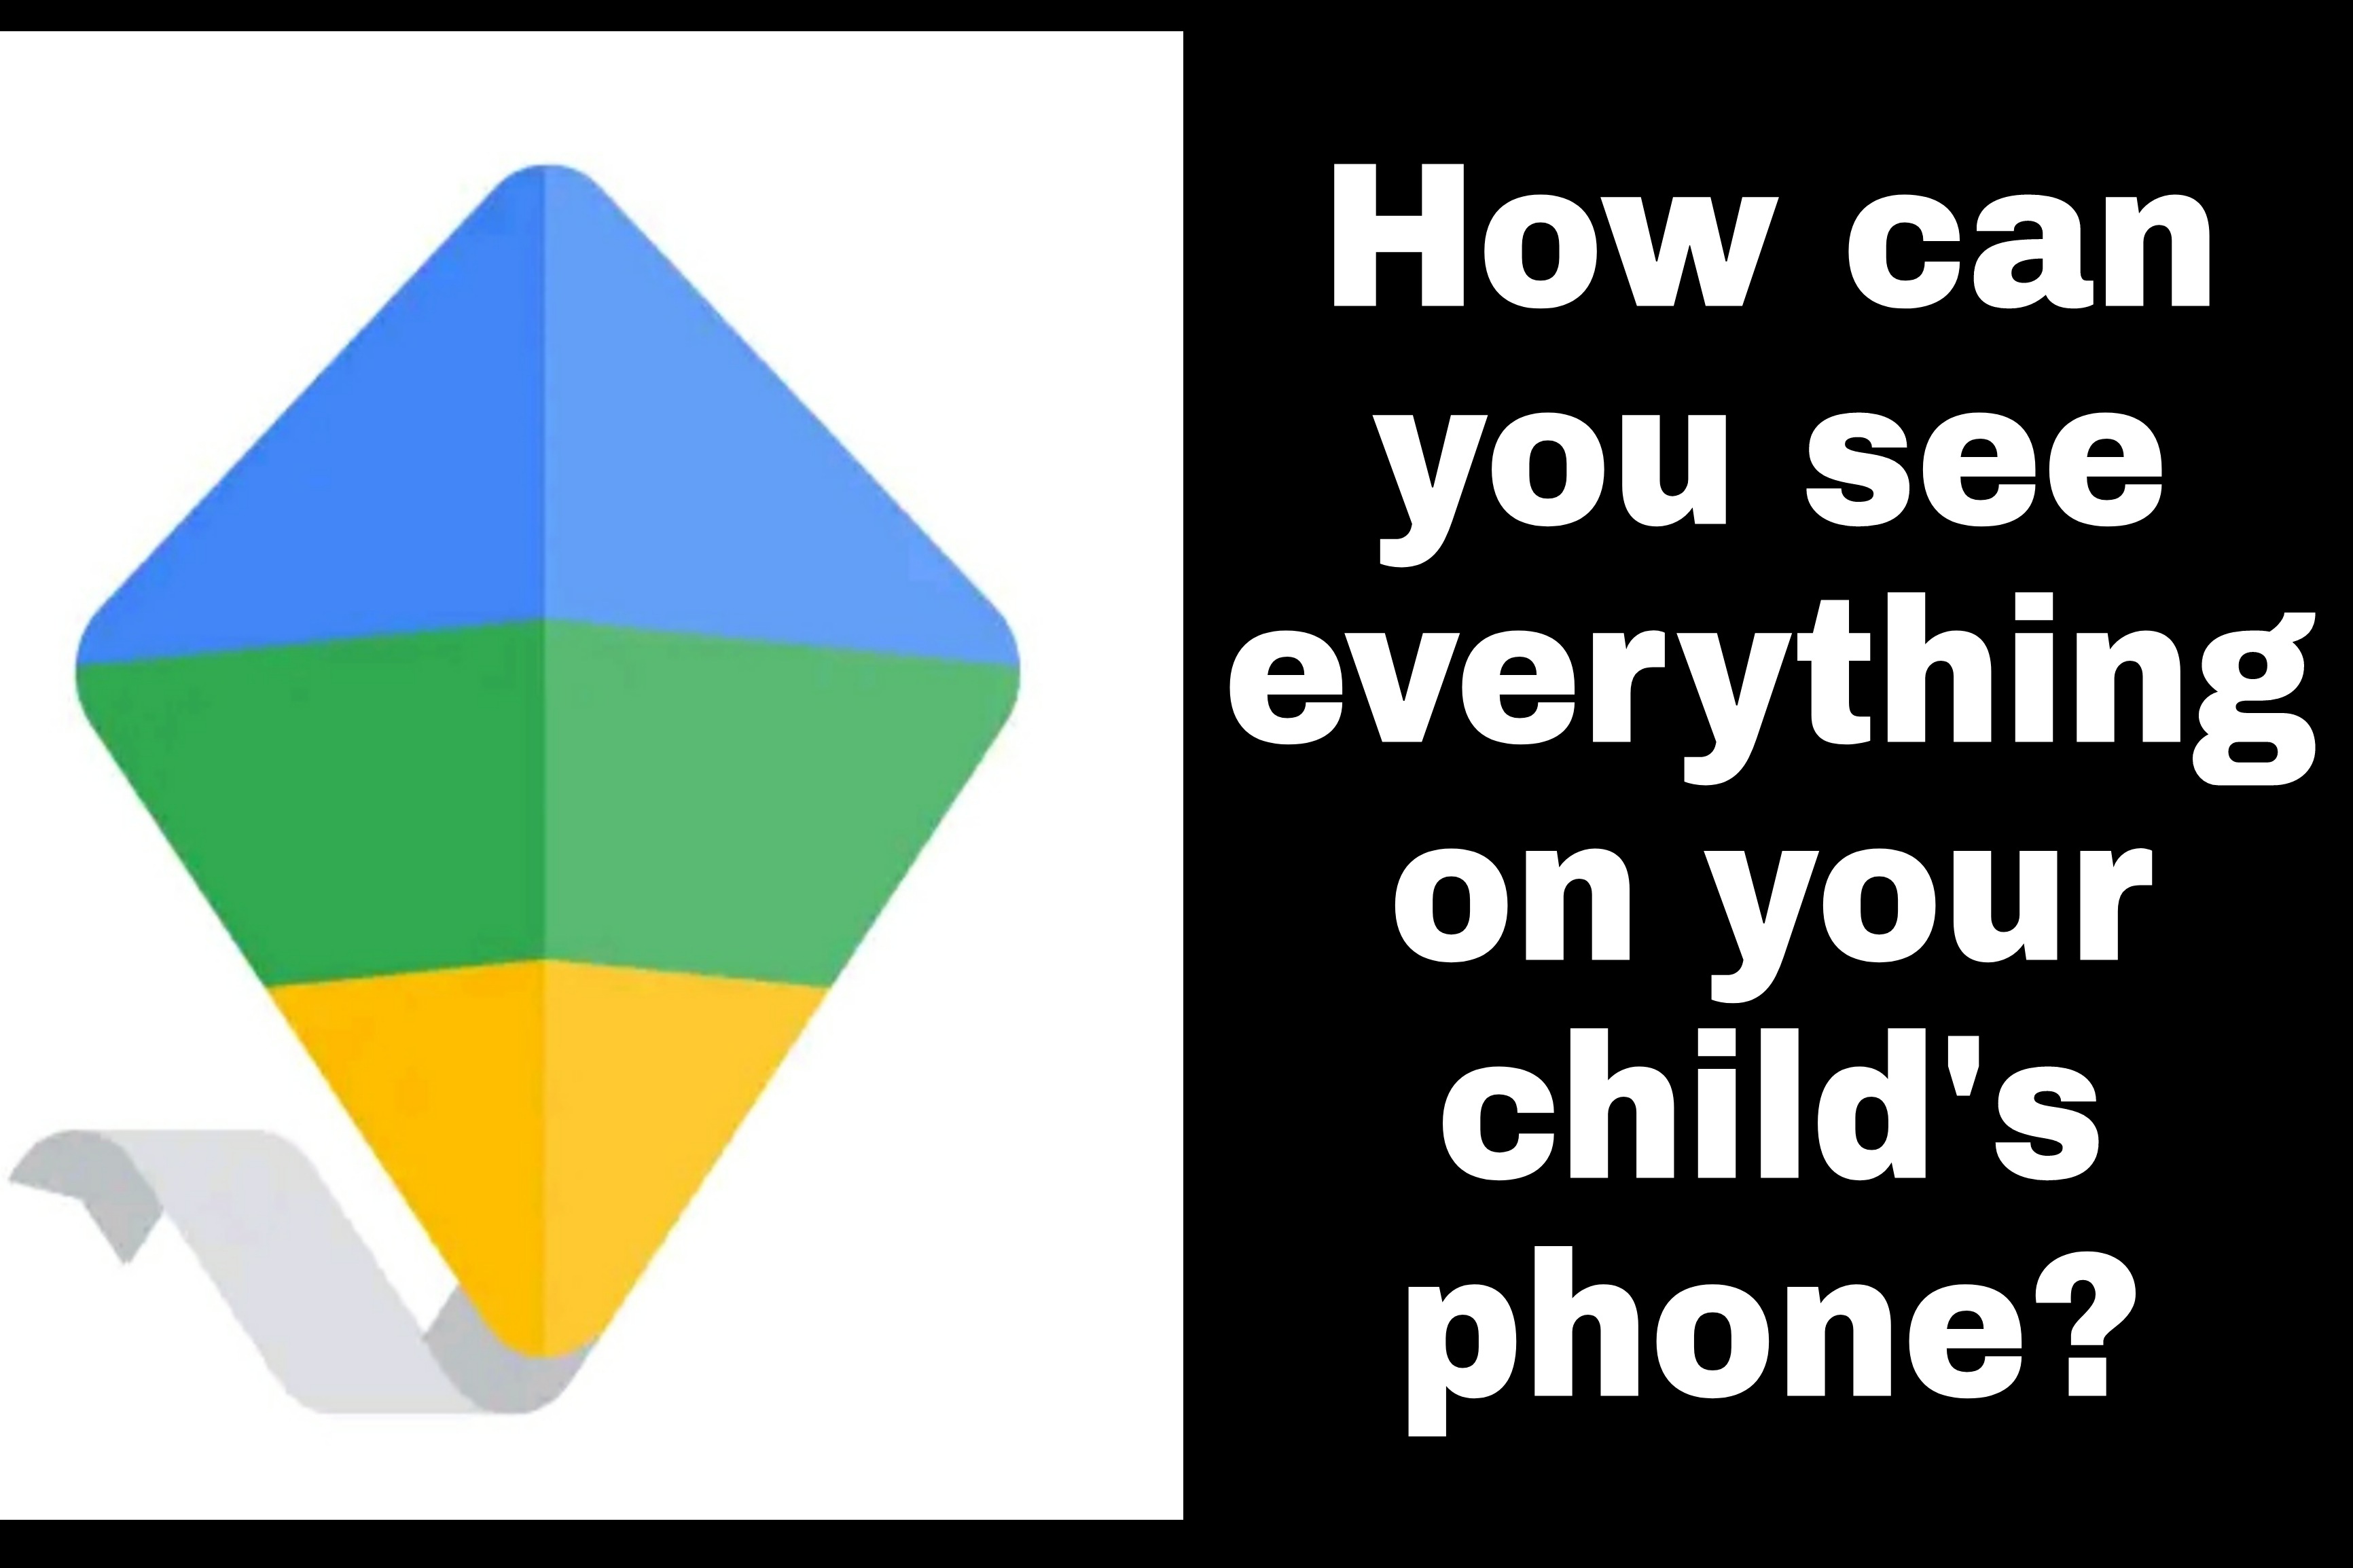 How can you see everything on your child's phone?